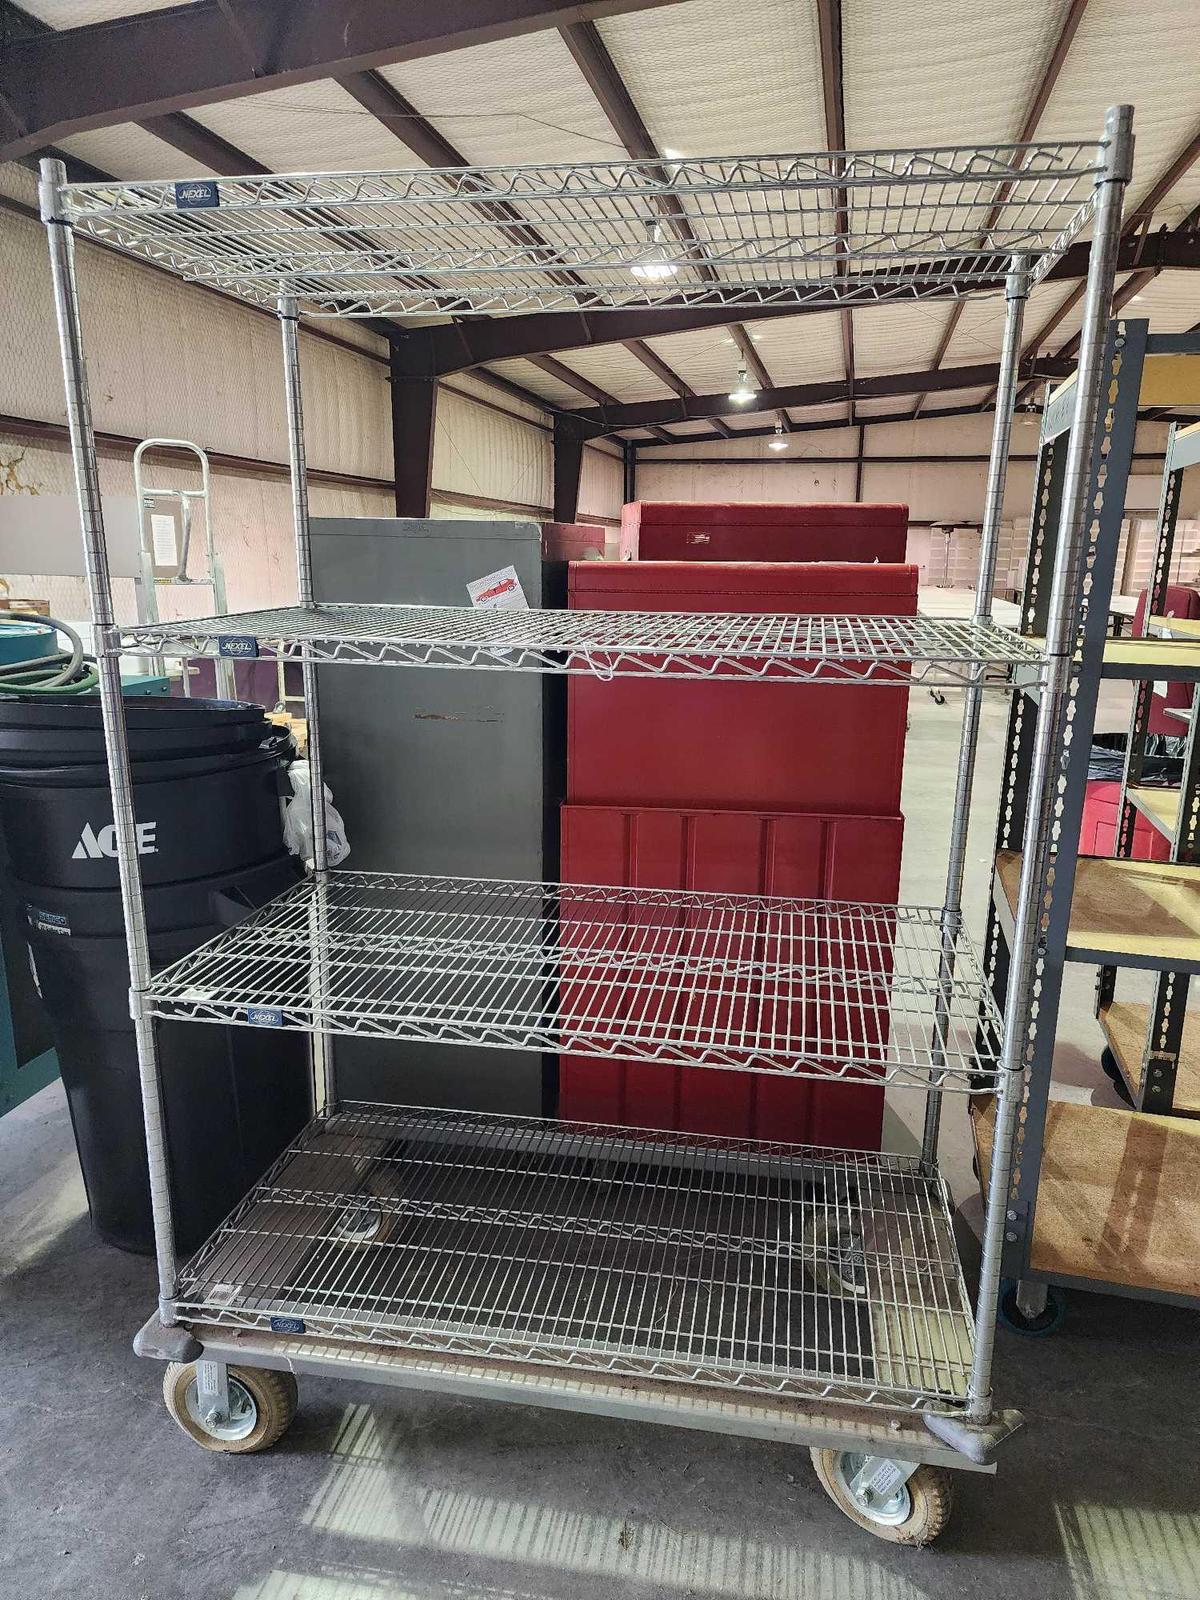 All steel 4 shelf roll storage. Used, in good condition. 48" x 24" x 72". Tires are air filled.